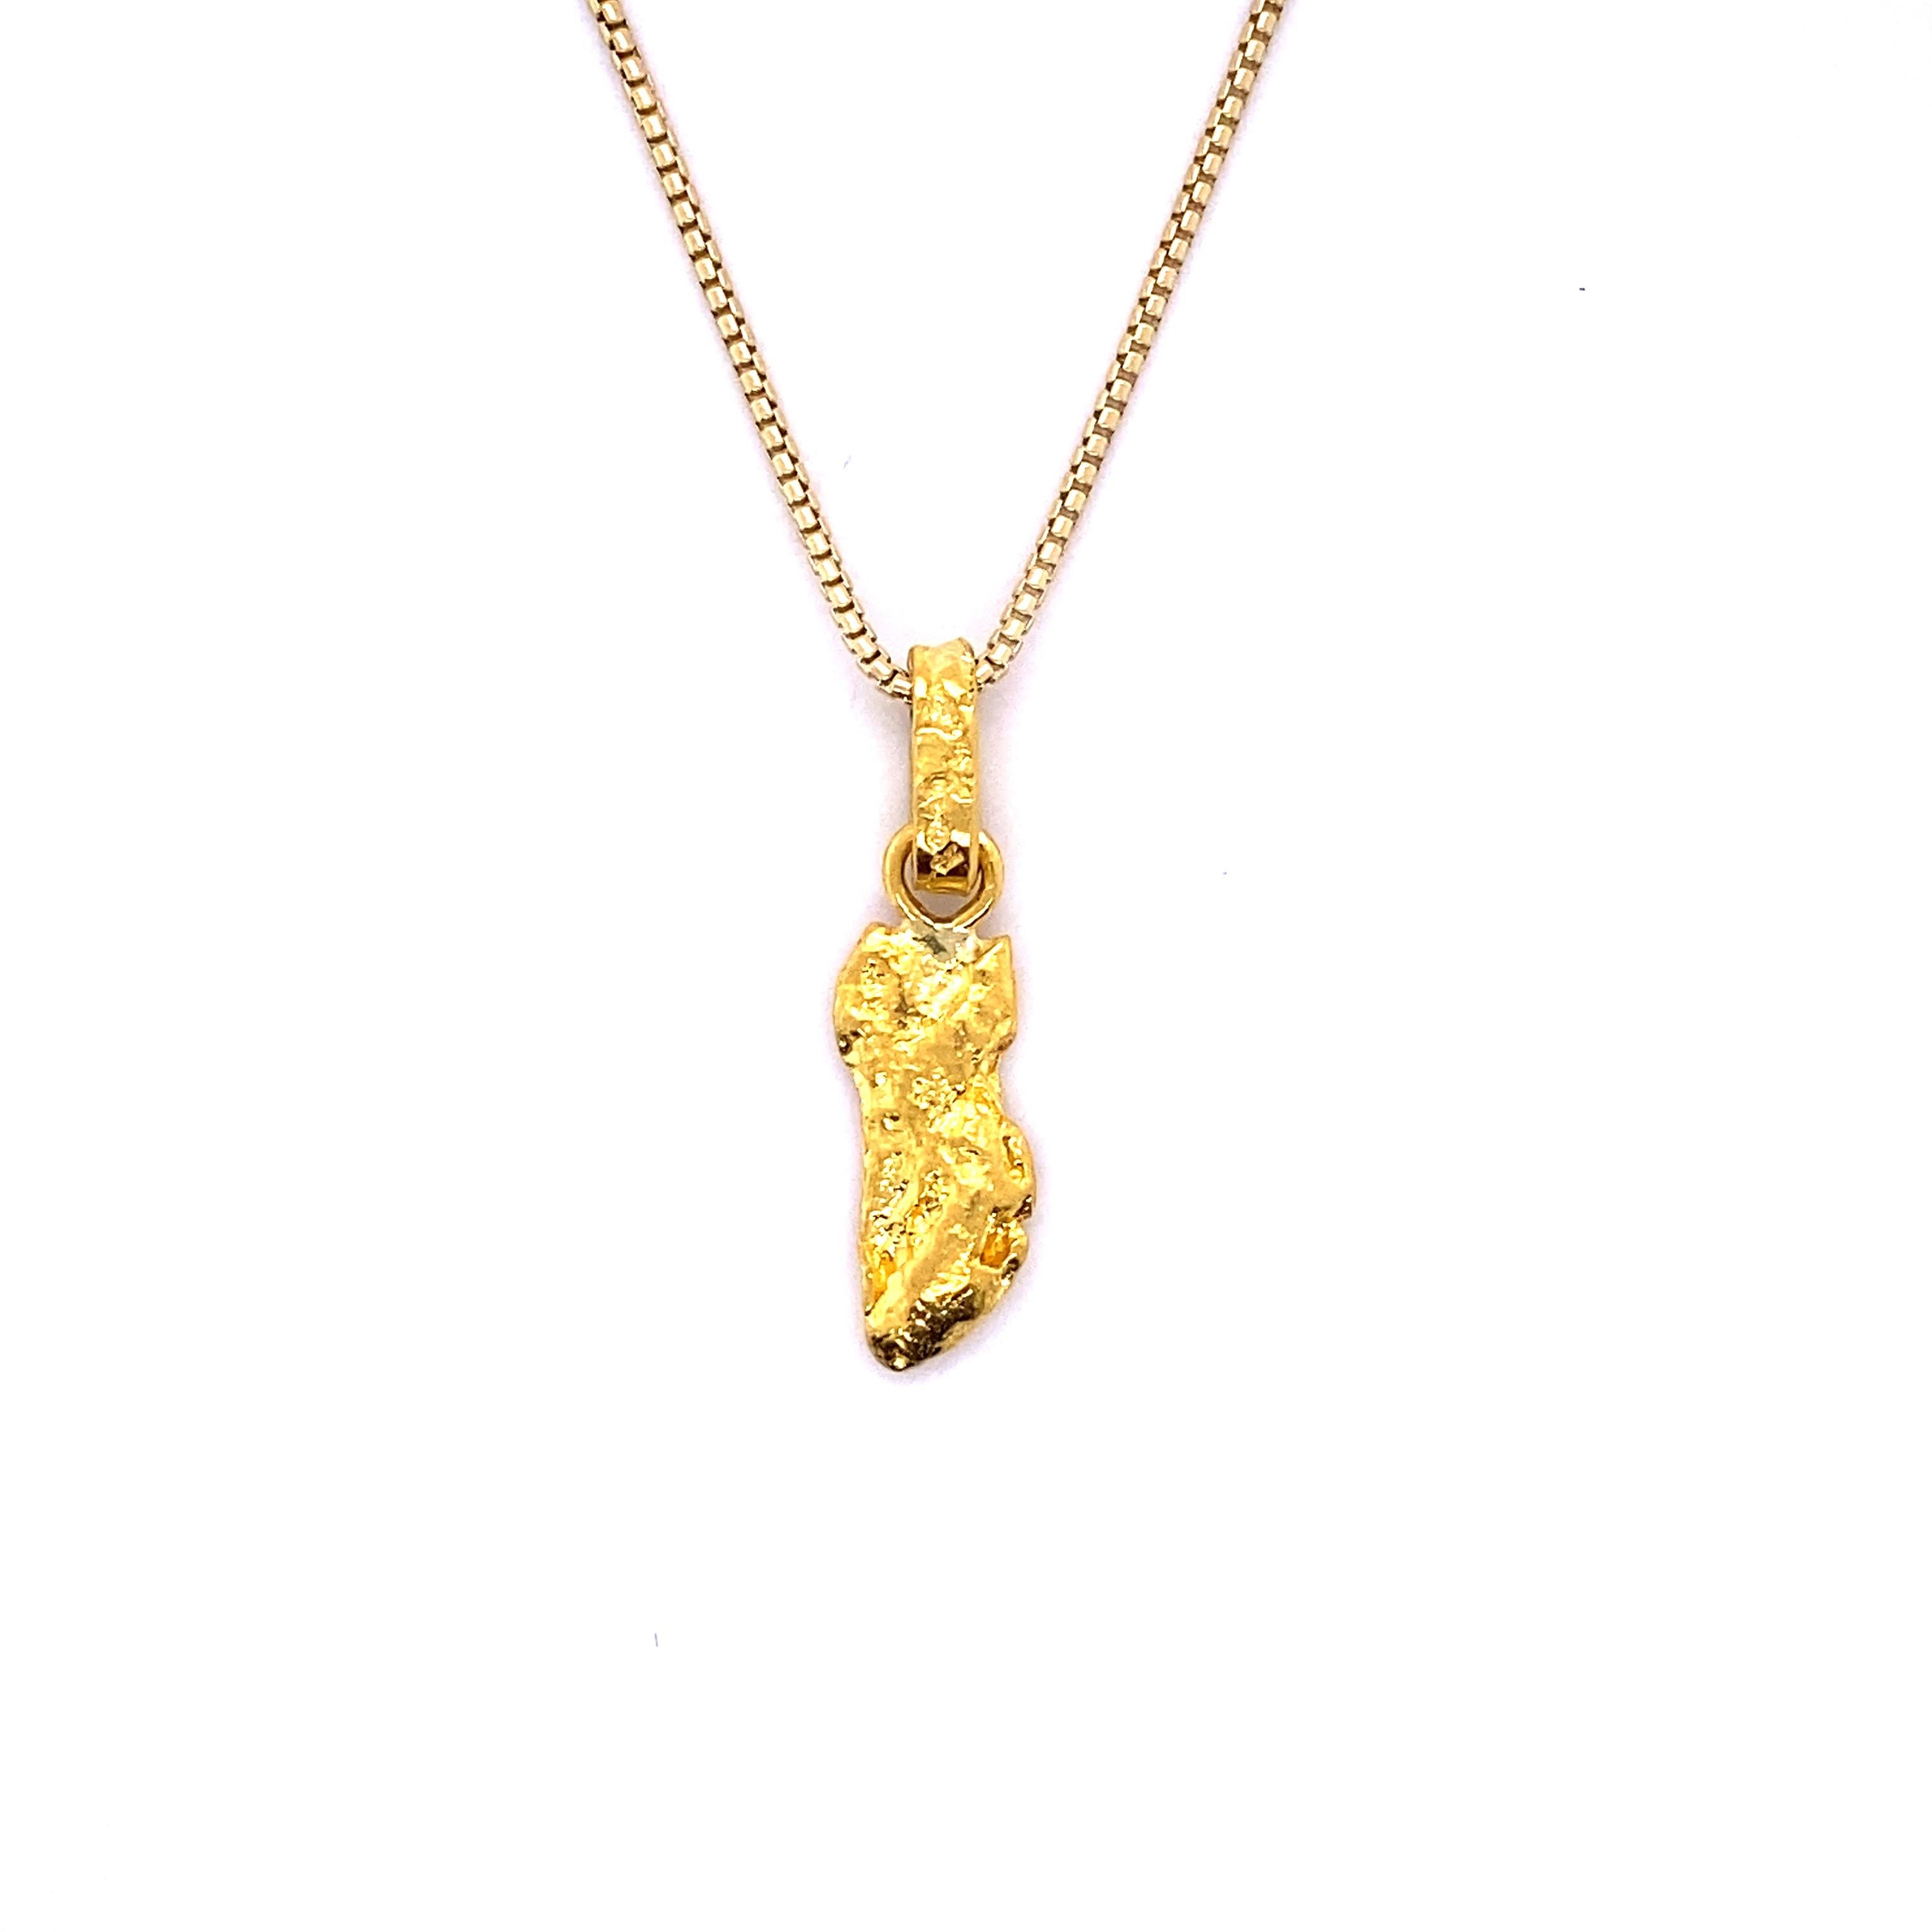 Women's or Men's Raw, Solid, 24k Yellow Golden Nugget Pendant, 3.9 Grams from Australia For Sale